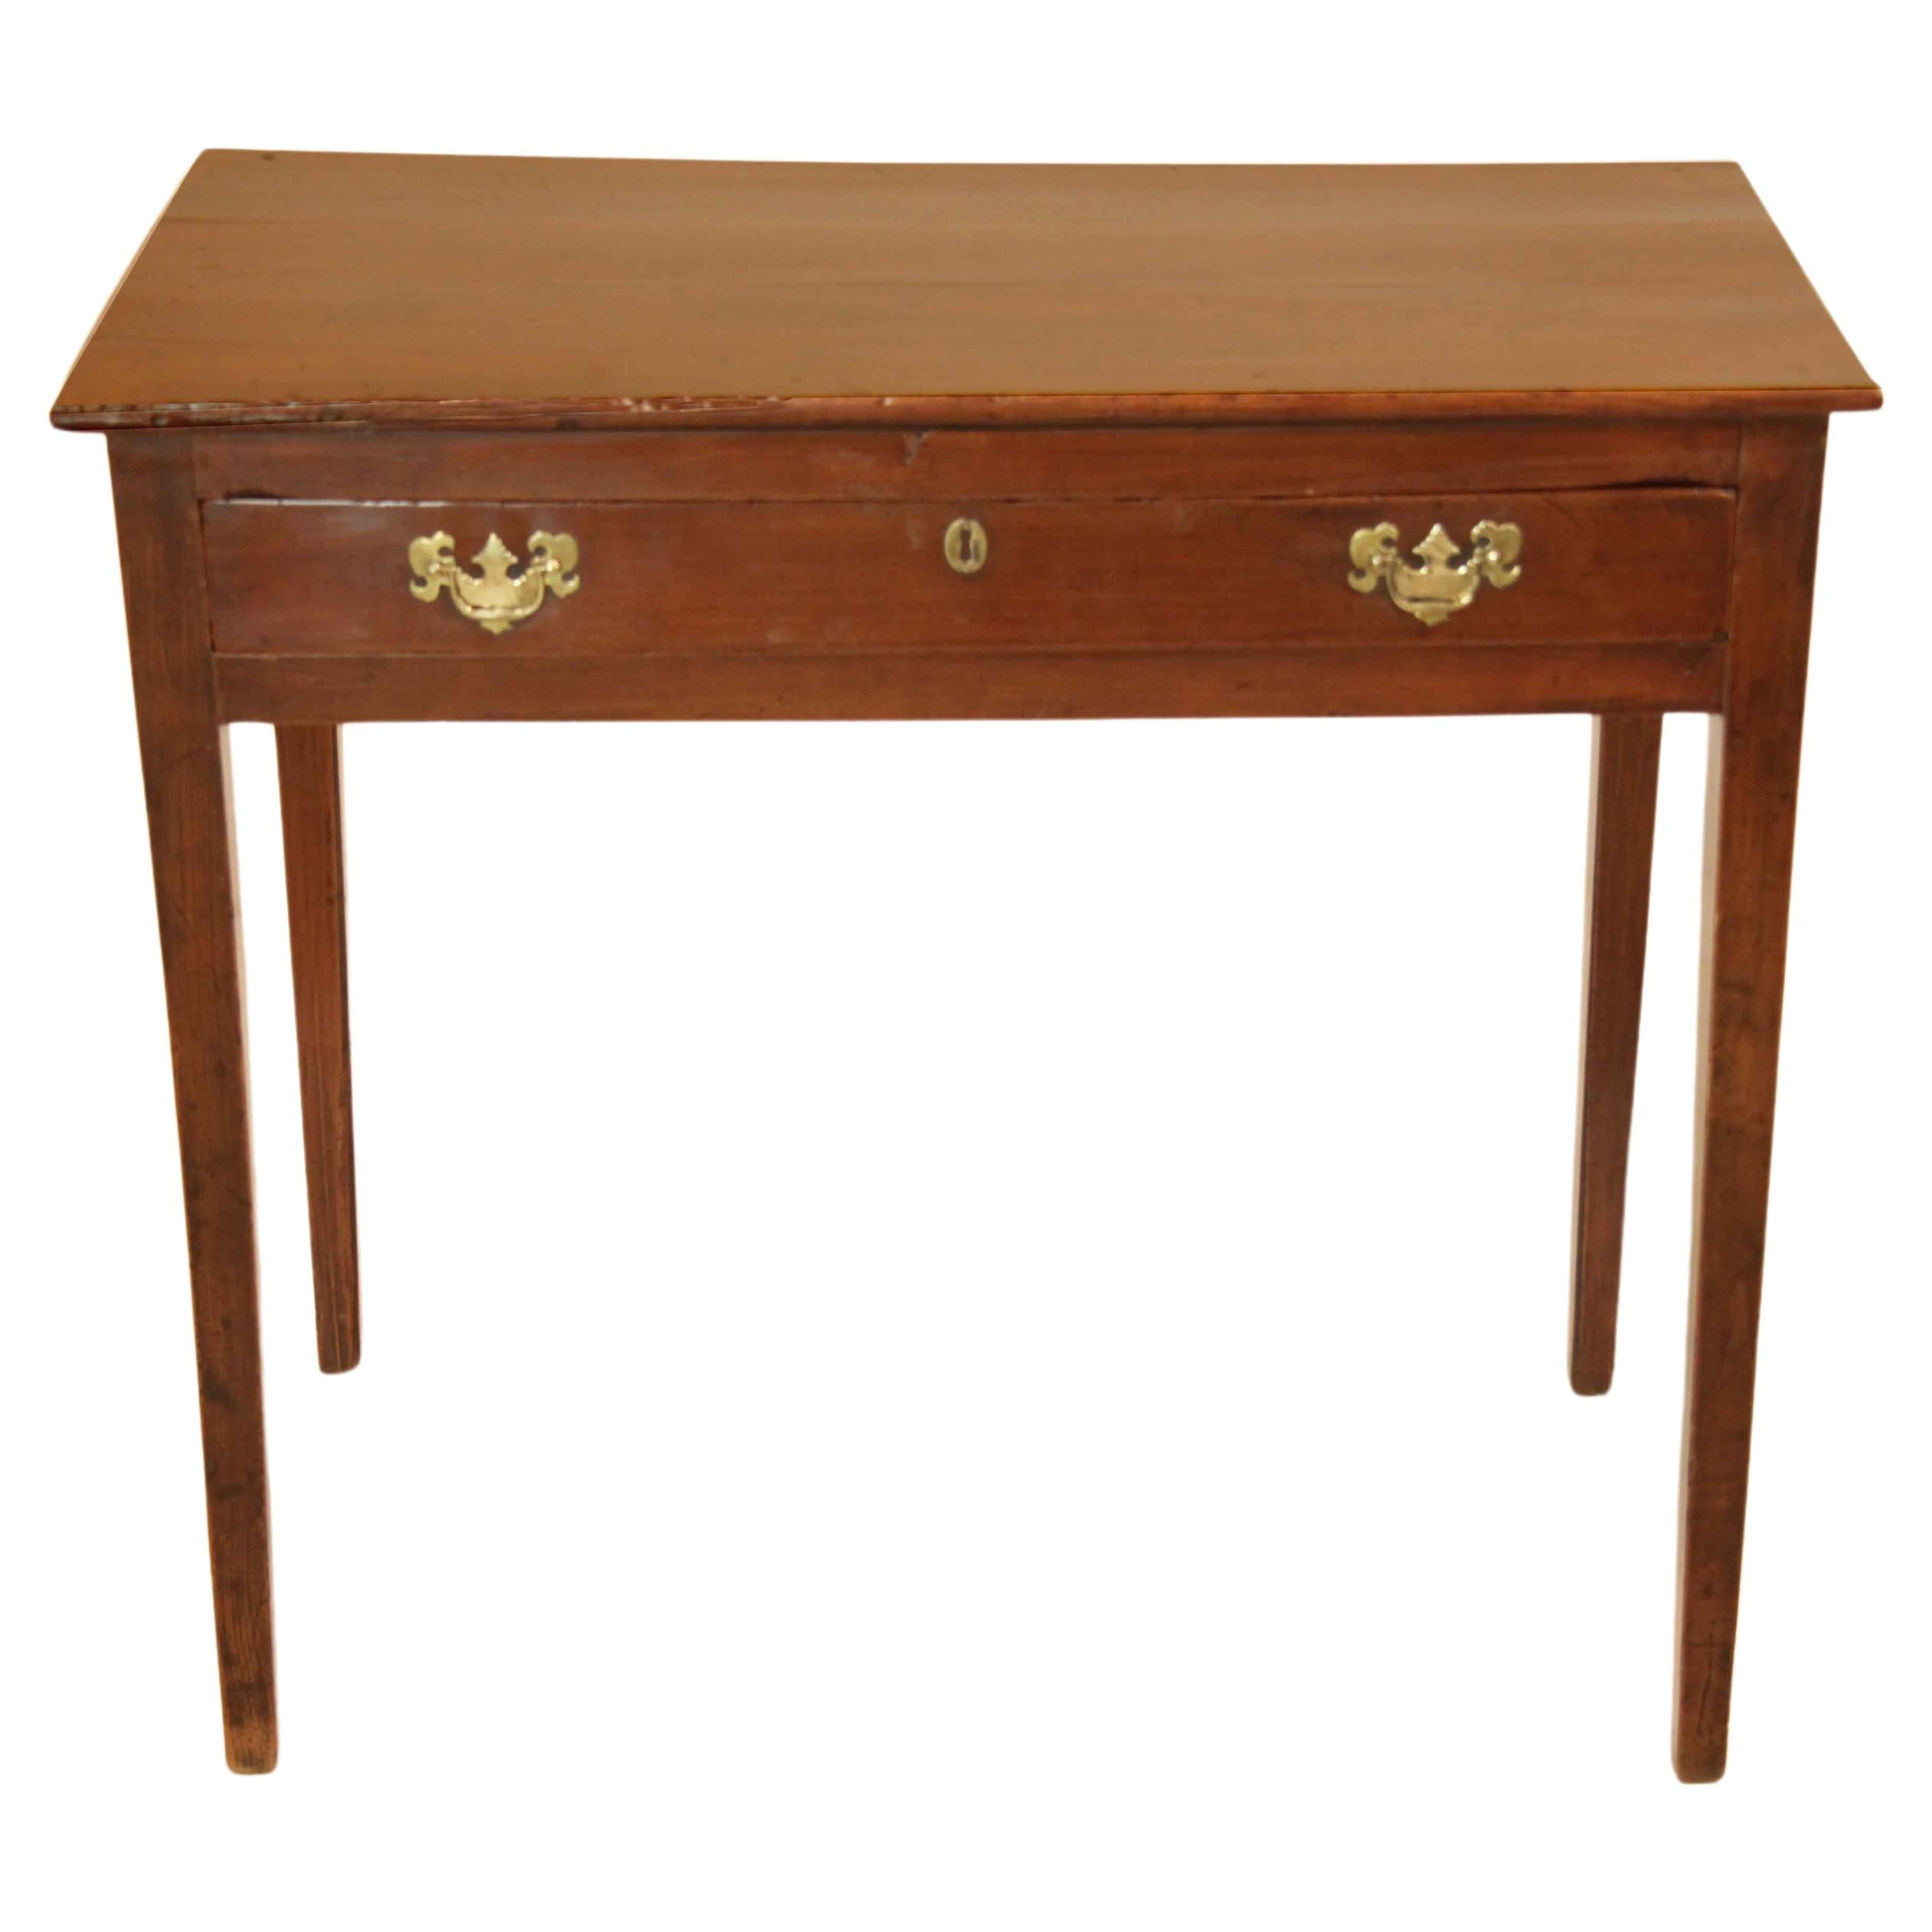 English Cherry One Drawer Side Table